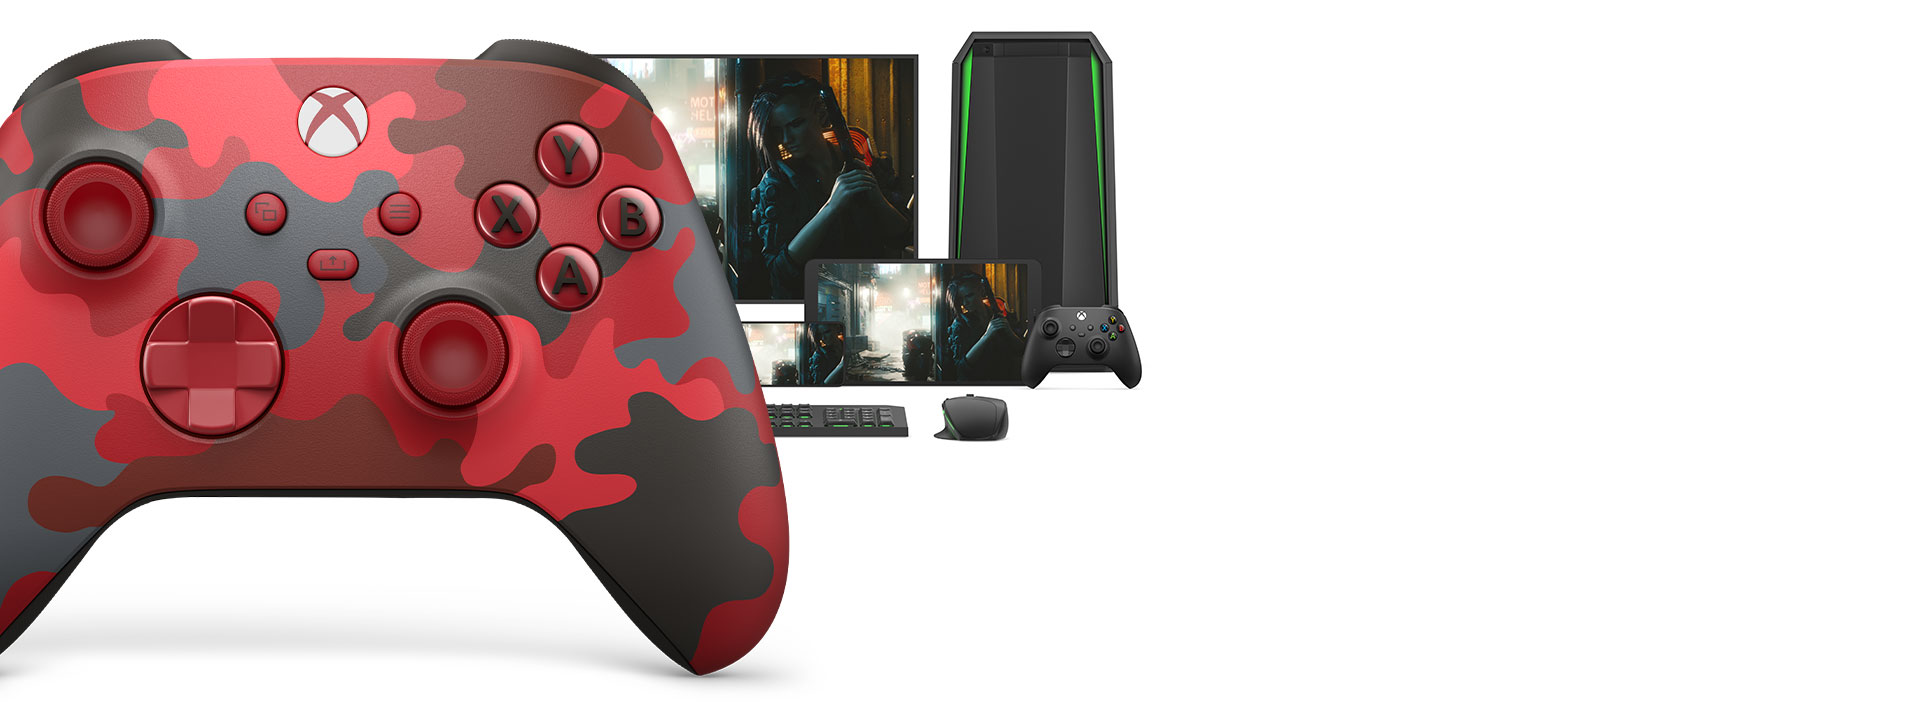 Xbox Wireless Controller daystrike camo with a computer, TV and mobile devices